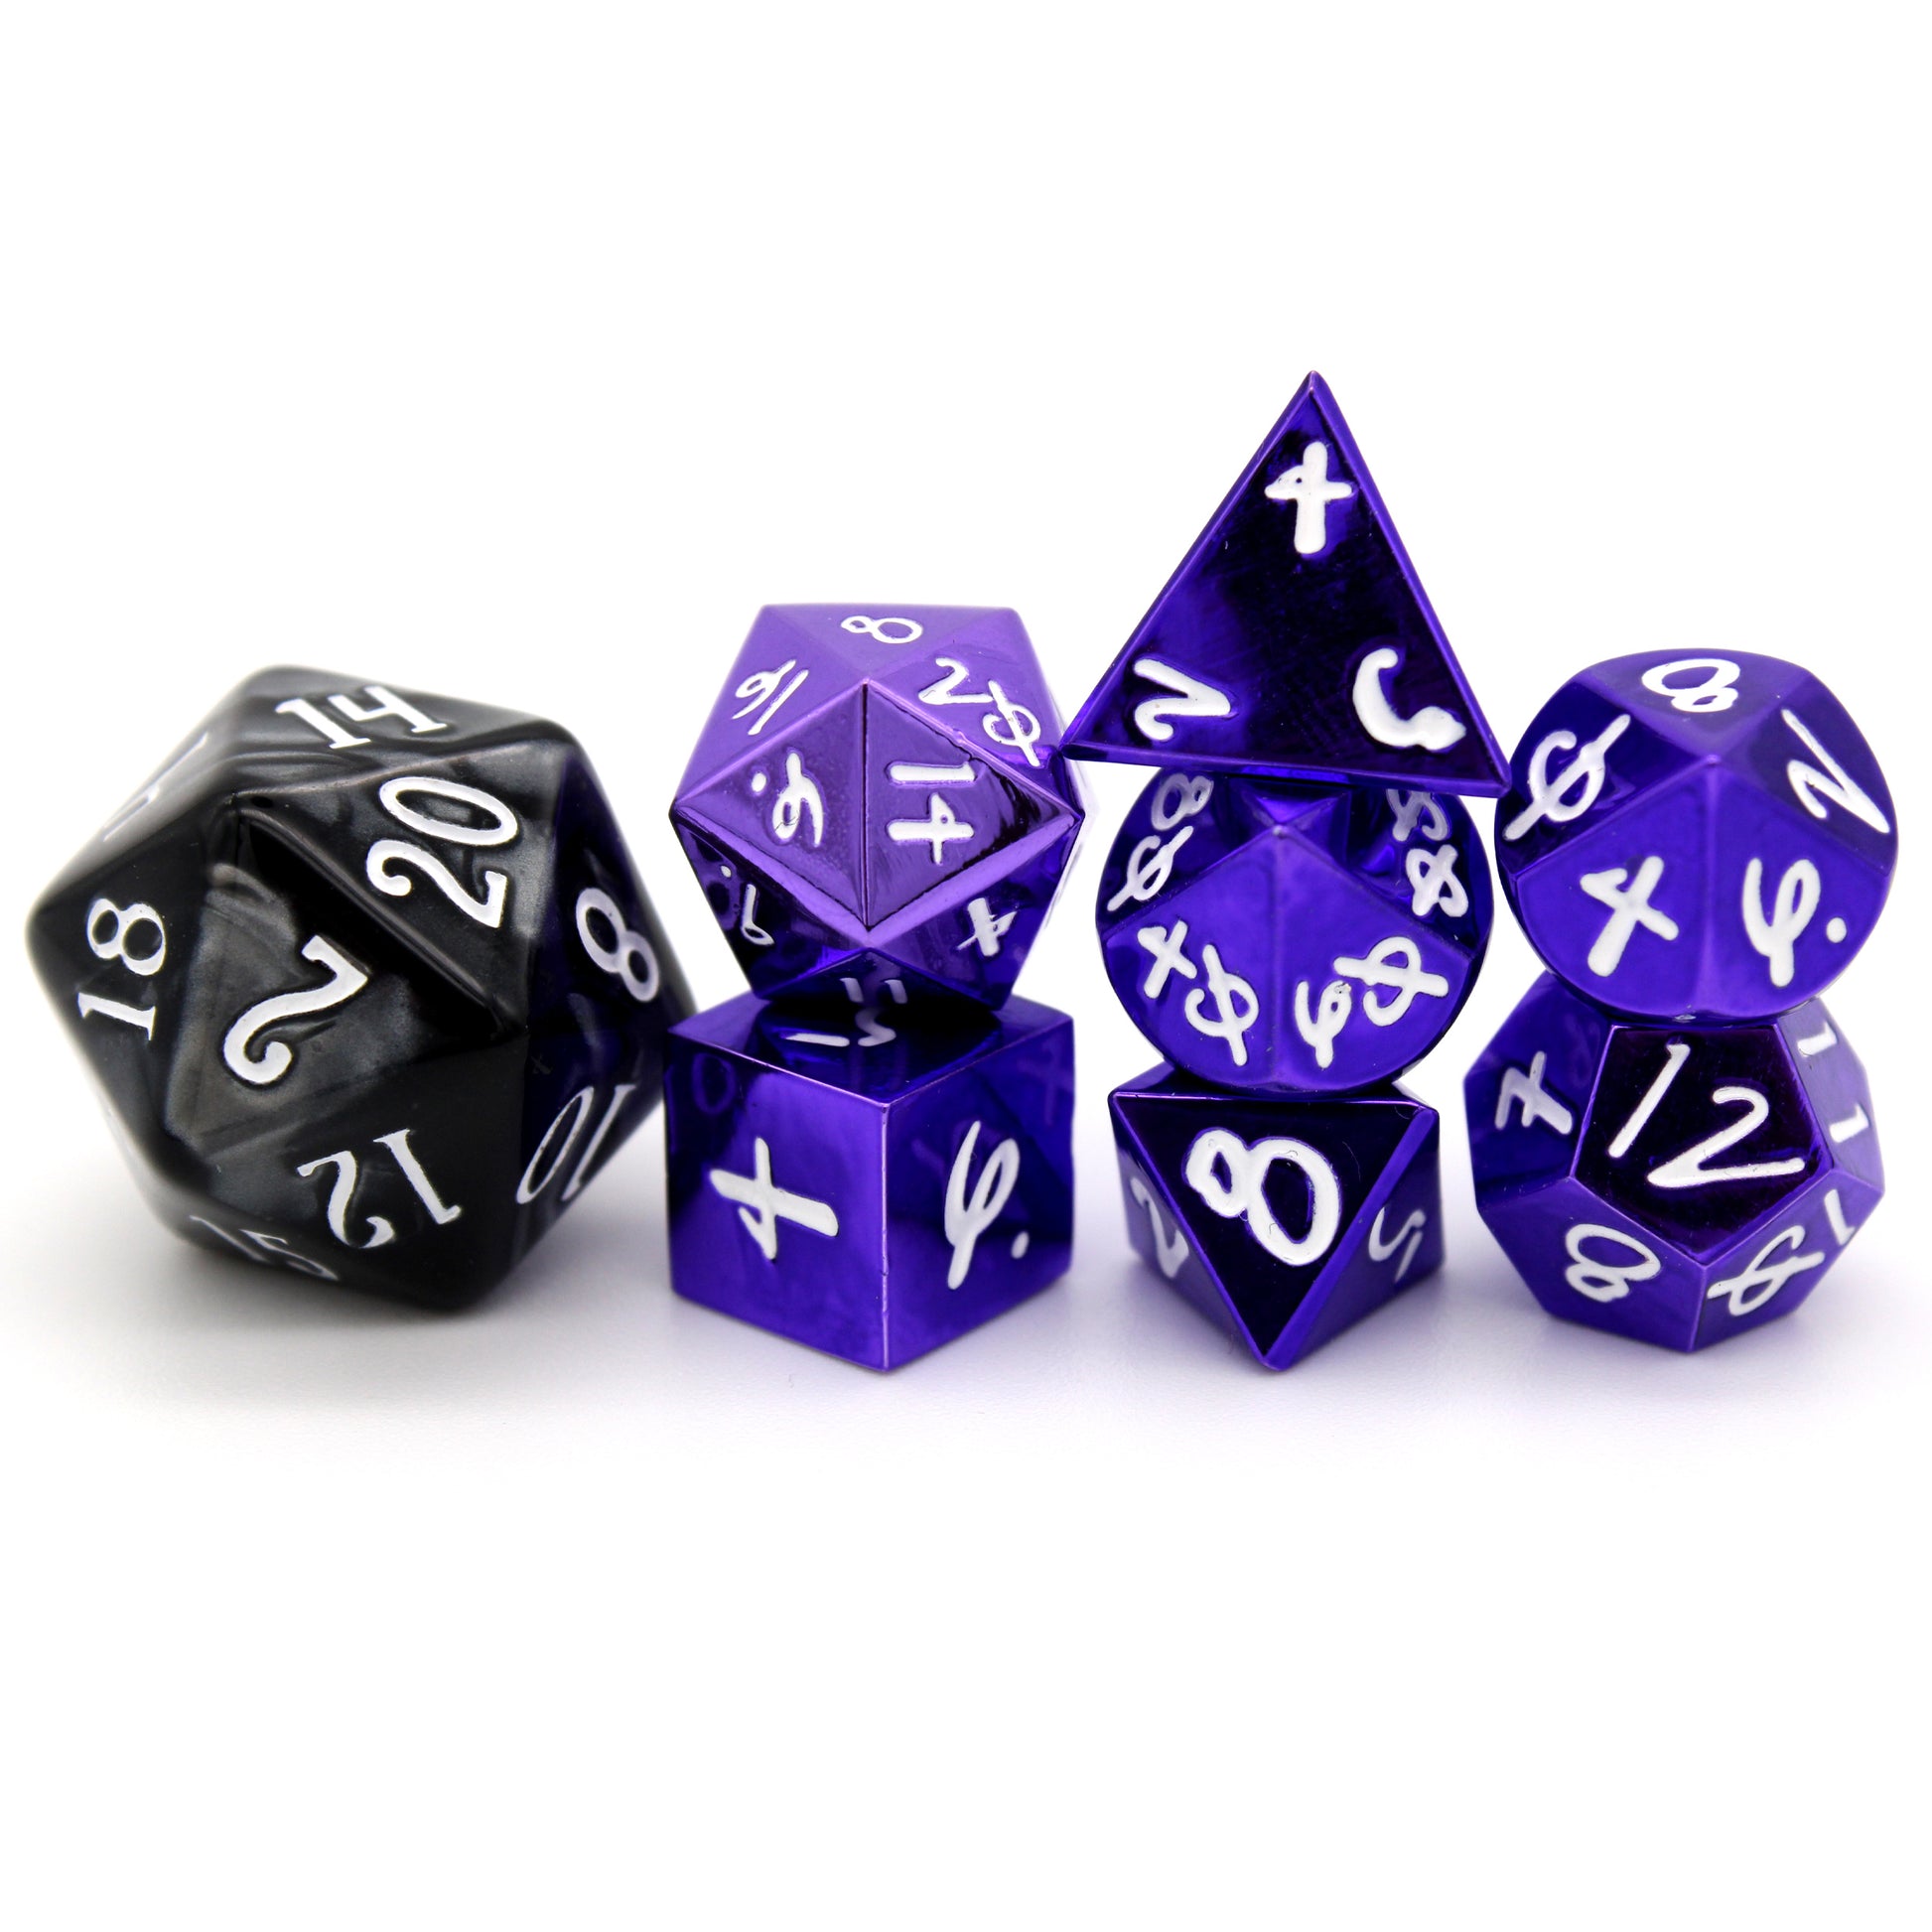 Mage Hand Wee Lads 7-piece, 10mm shiny purple metal set with white ink